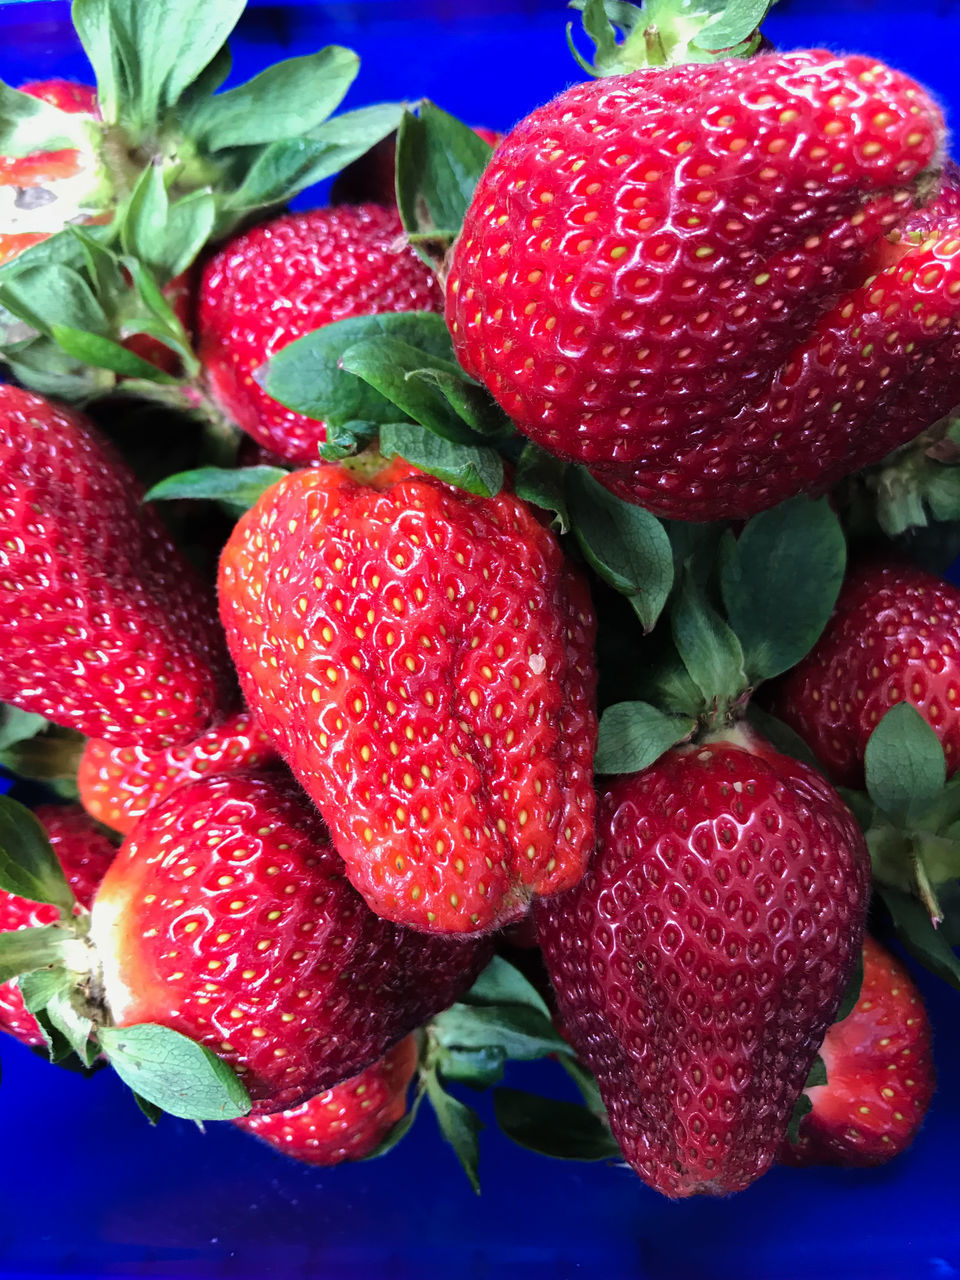 CLOSE-UP OF FRESH STRAWBERRIES IN CONTAINER